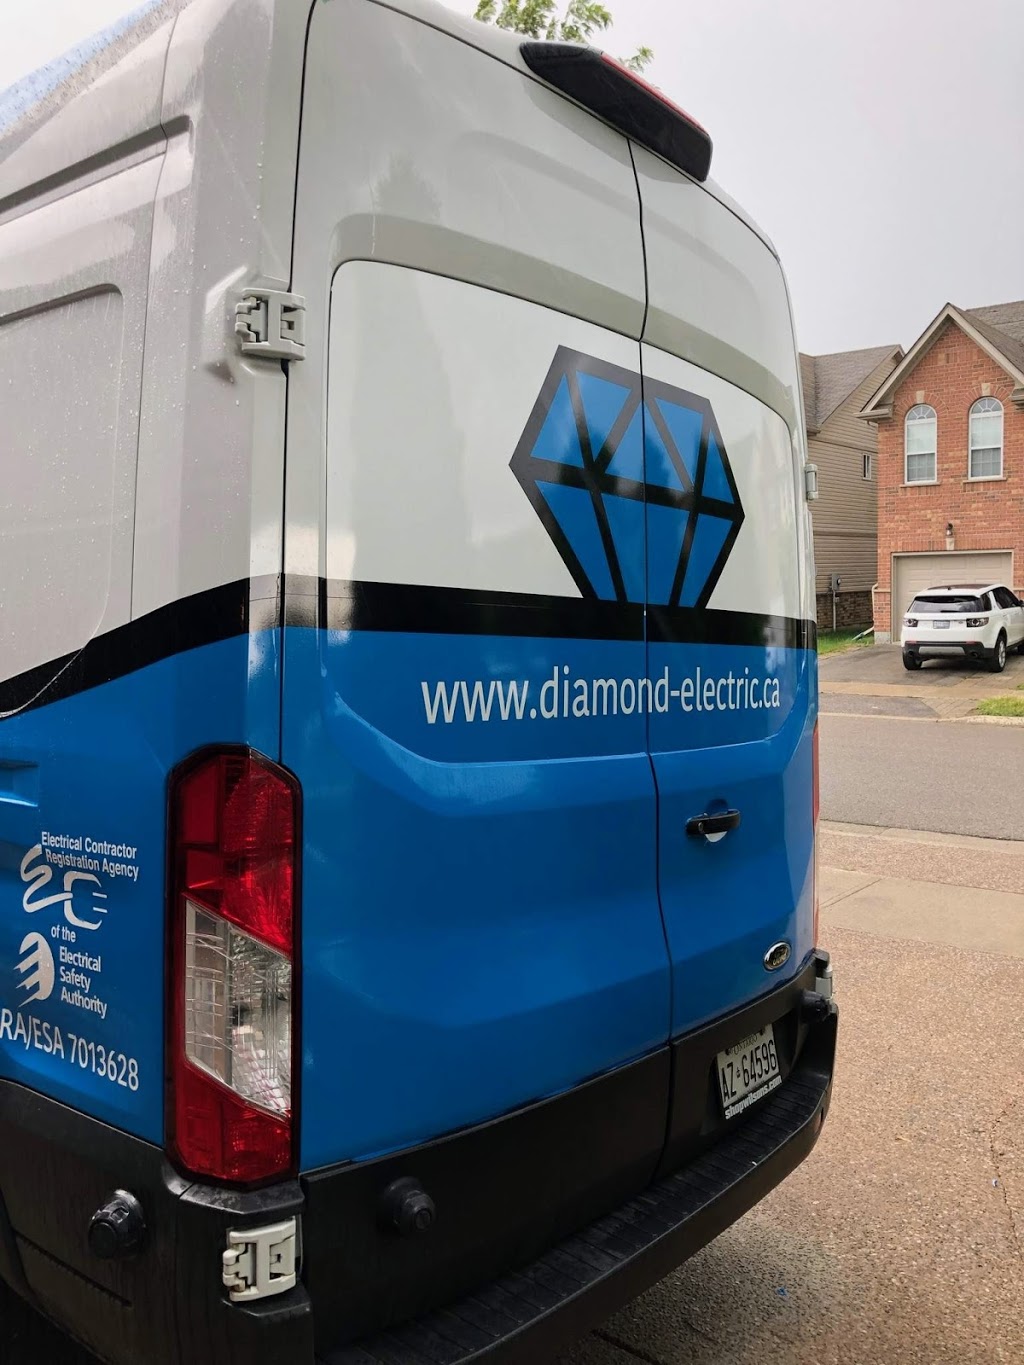 Diamond Electric | electrician | 165 Imperial Rd N, Guelph, ON N1H 3B8, Canada | 5197807120 OR +1 519-780-7120